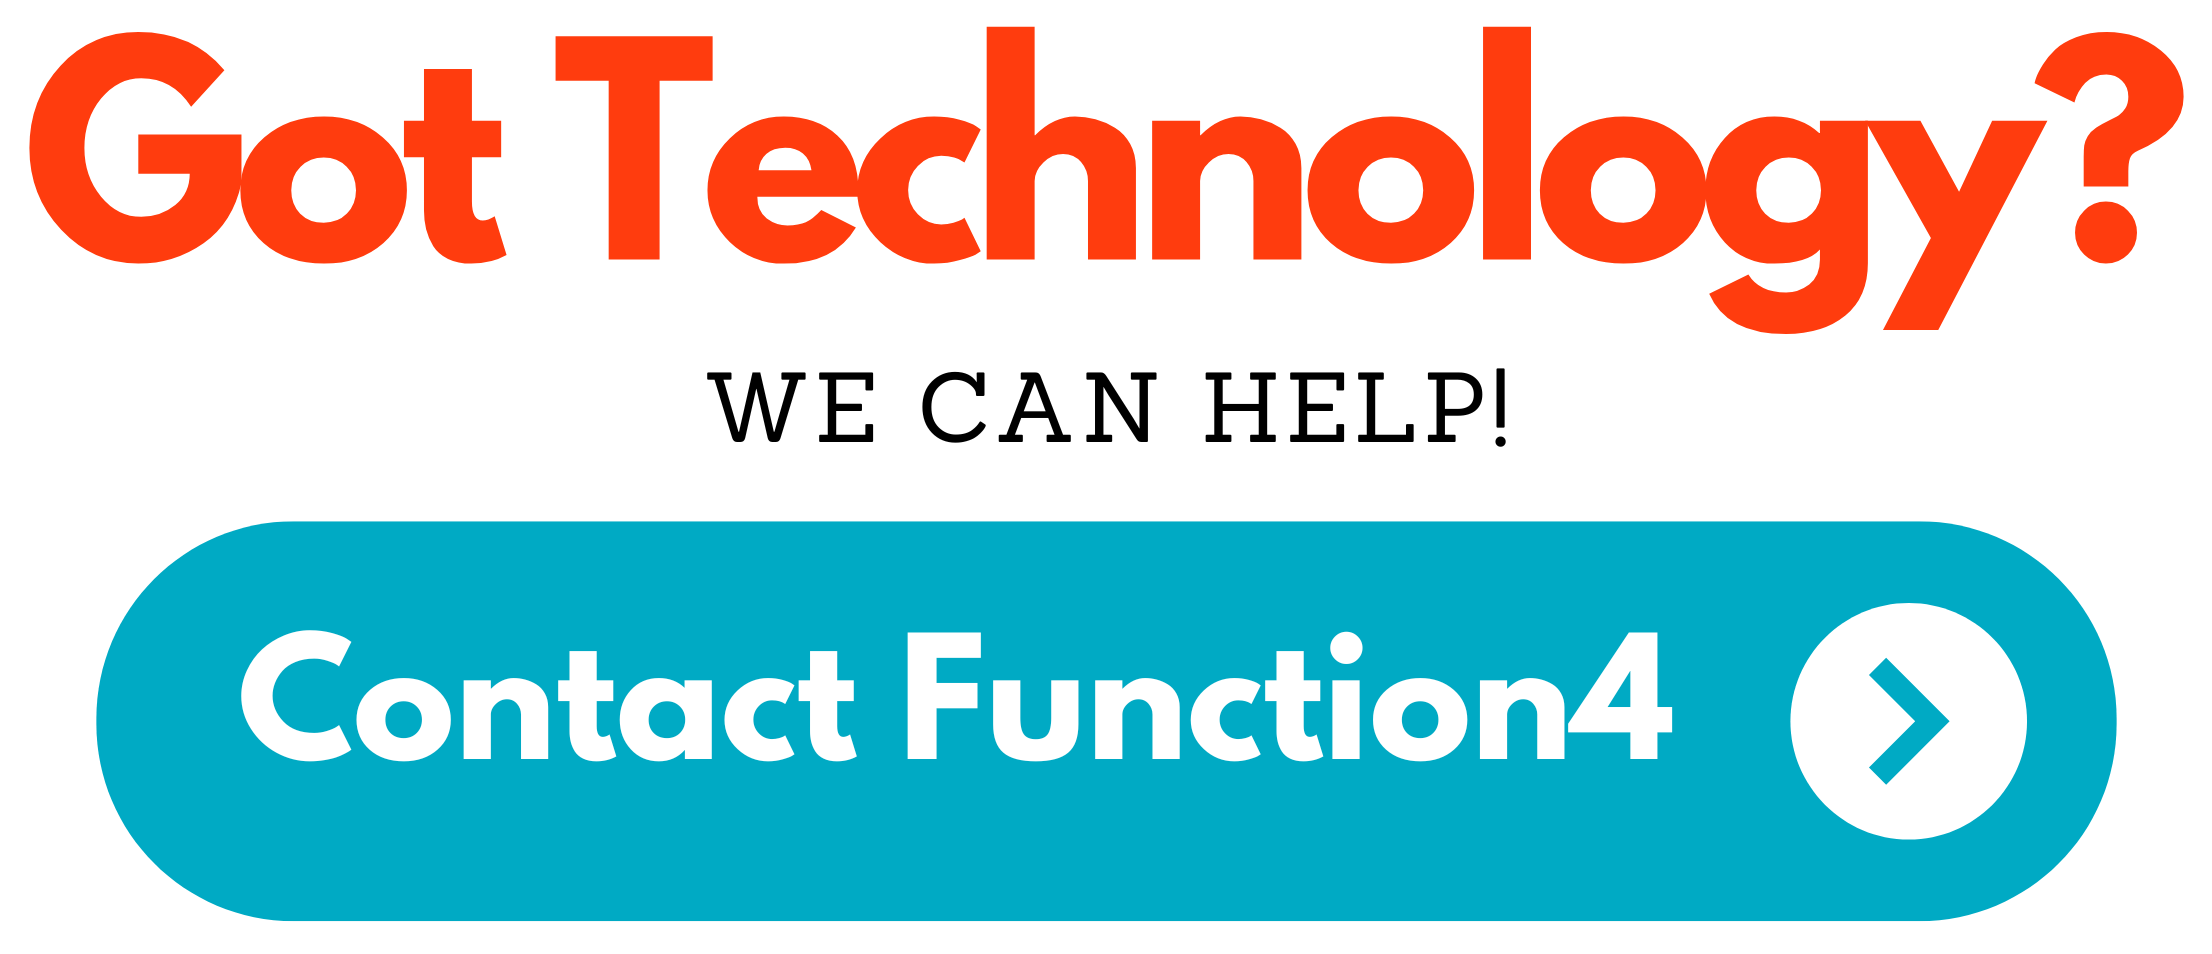 Got Technology? We can Help! Contact Function 4